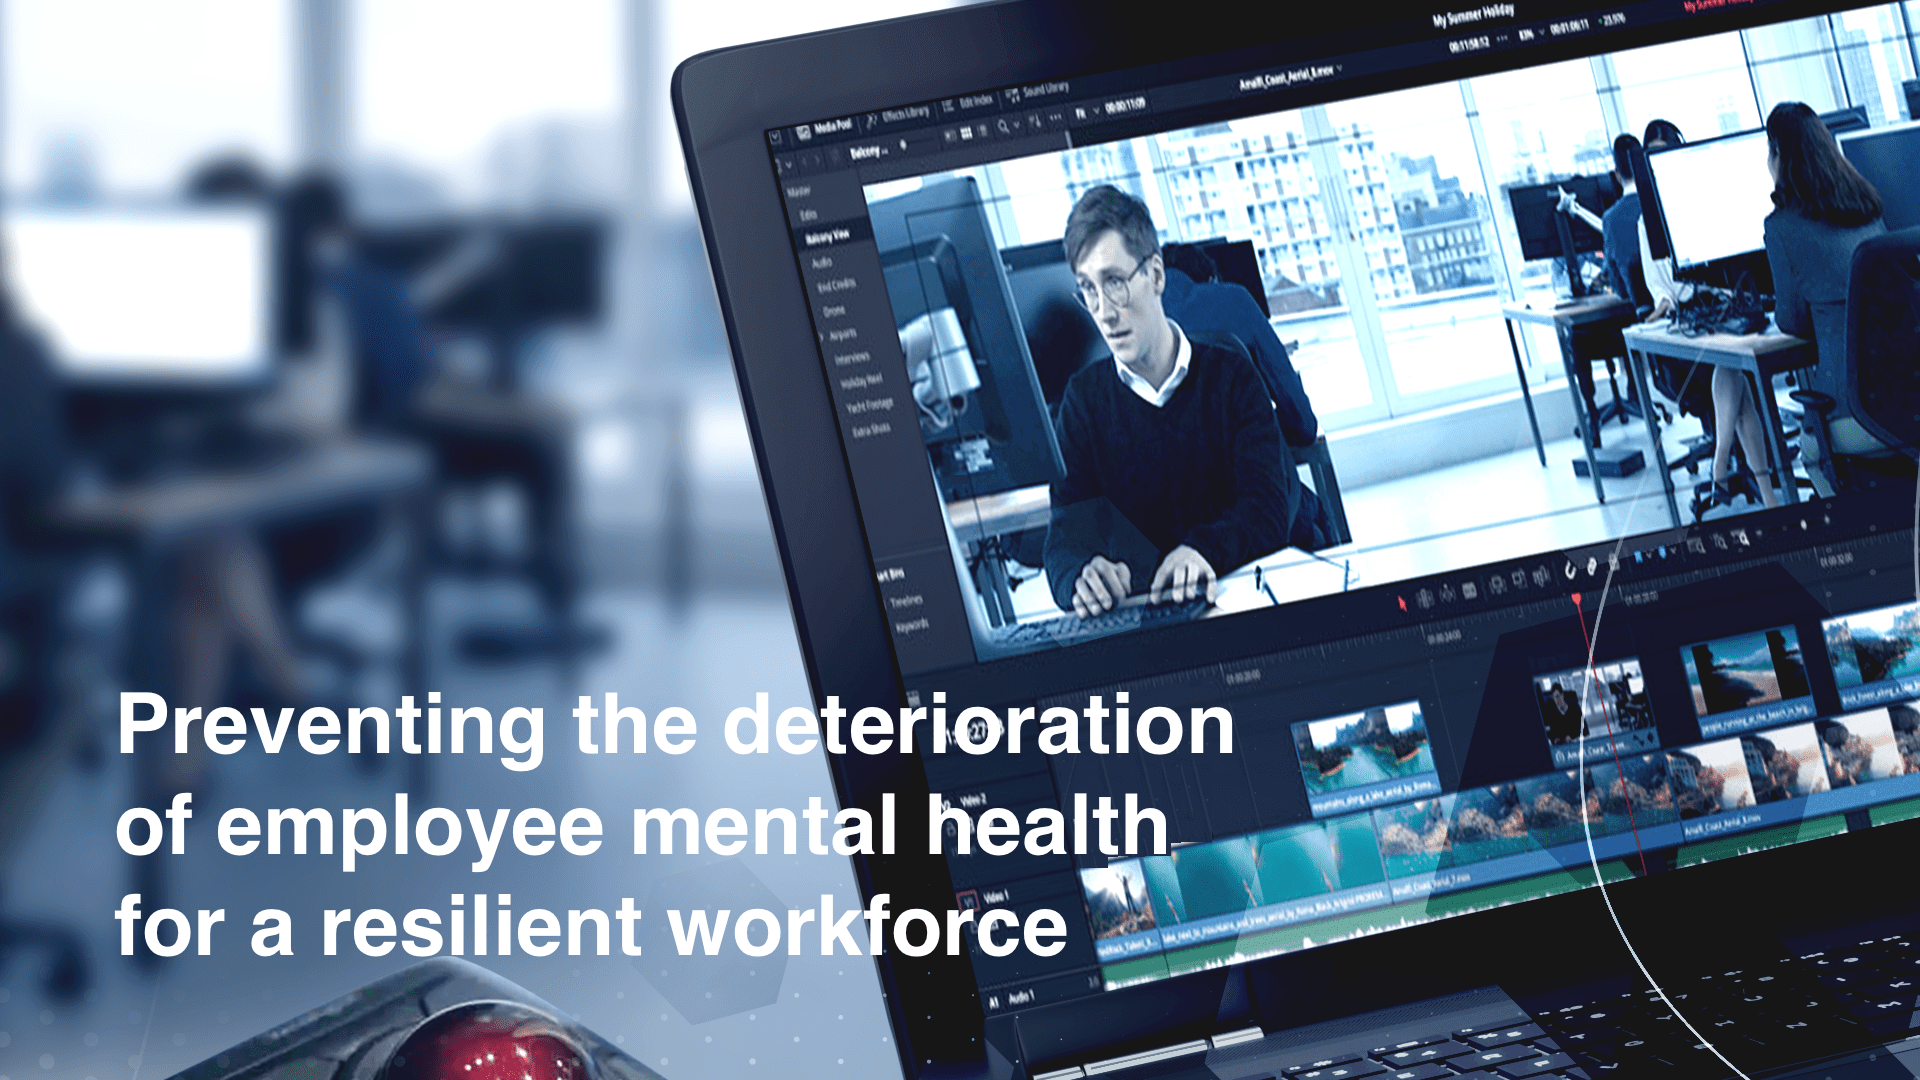 Preventing the deterioration of employee mental health for a resilient workforce